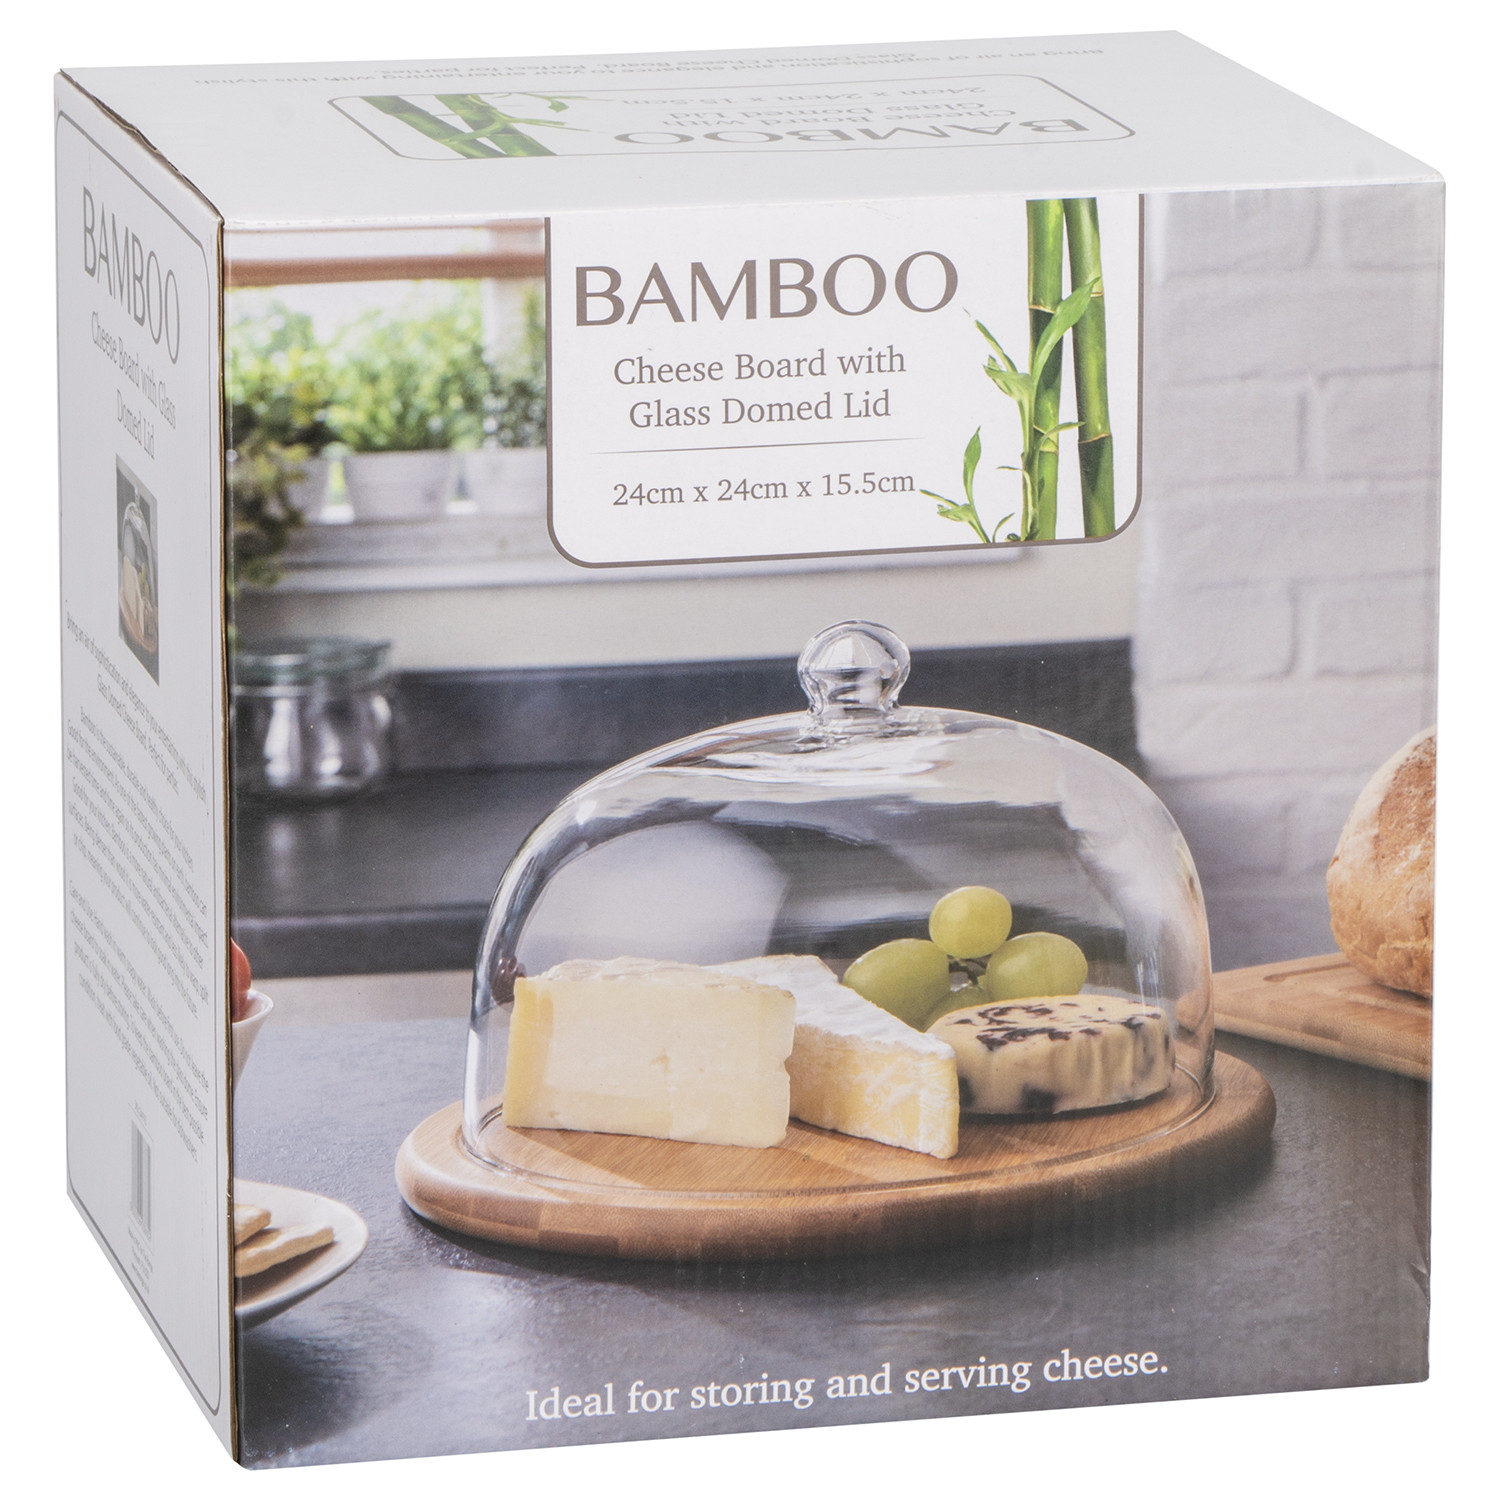 Bamboo Cheese Board with Glass Domed Lid Image 2